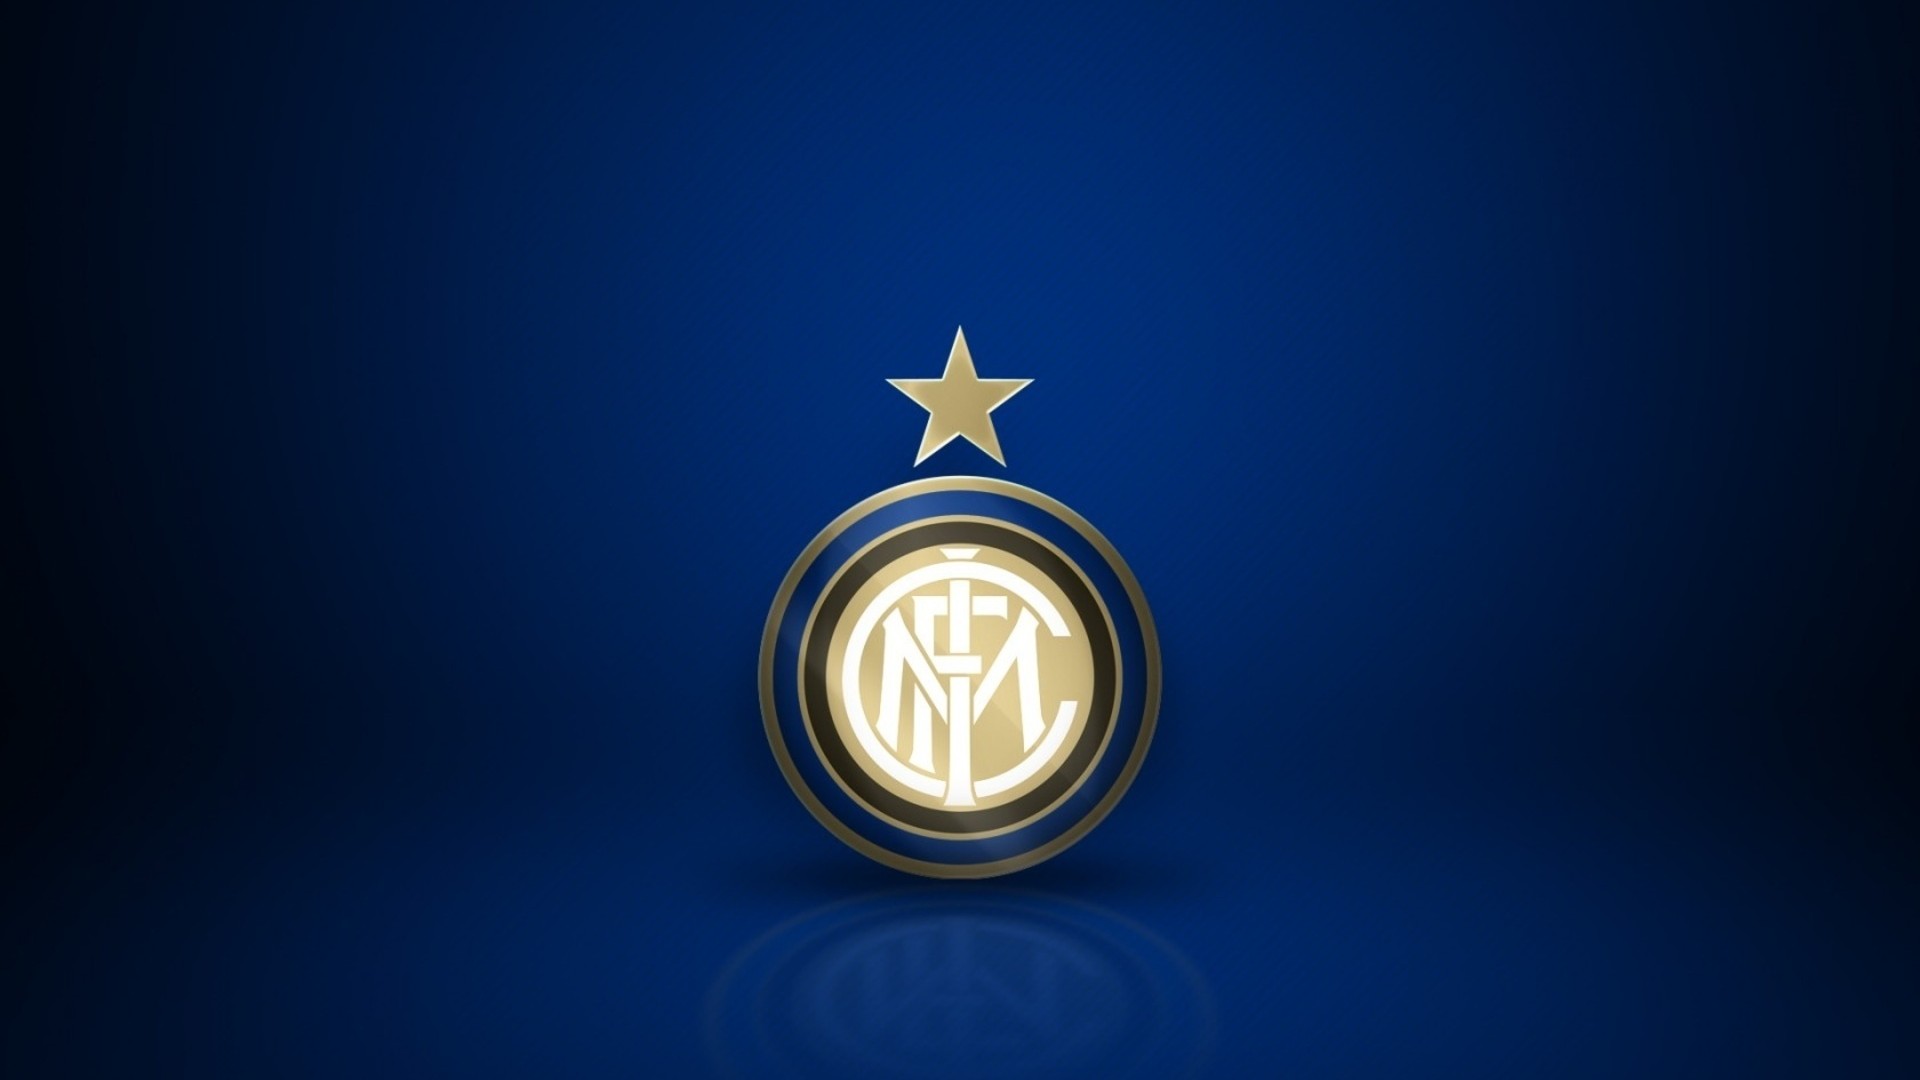 HD Inter Milan Wallpapers with high-resolution 1920x1080 pixel. You can use this wallpaper for your Desktop Computers, Mac Screensavers, Windows Backgrounds, iPhone Wallpapers, Tablet or Android Lock screen and another Mobile device